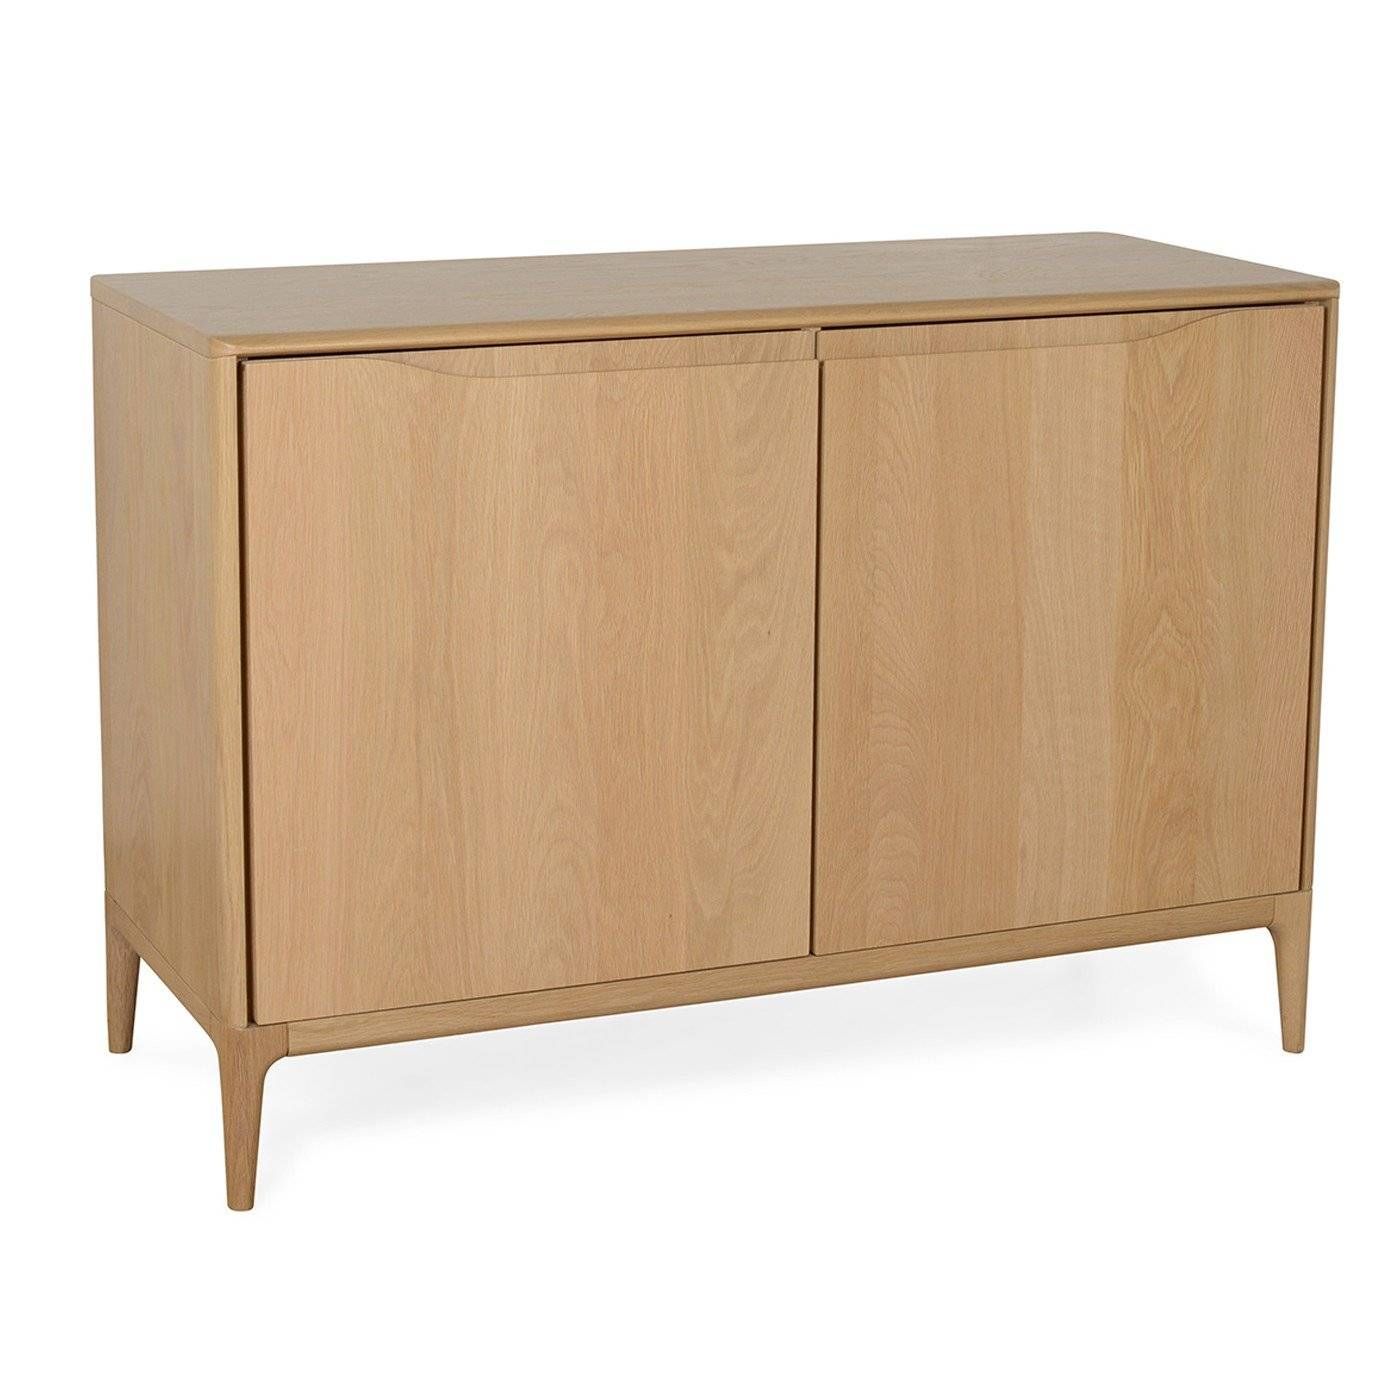 Romana Small Sideboard 2 Door Dead Matt Oak Intended For Ready Made Sideboards (View 23 of 30)